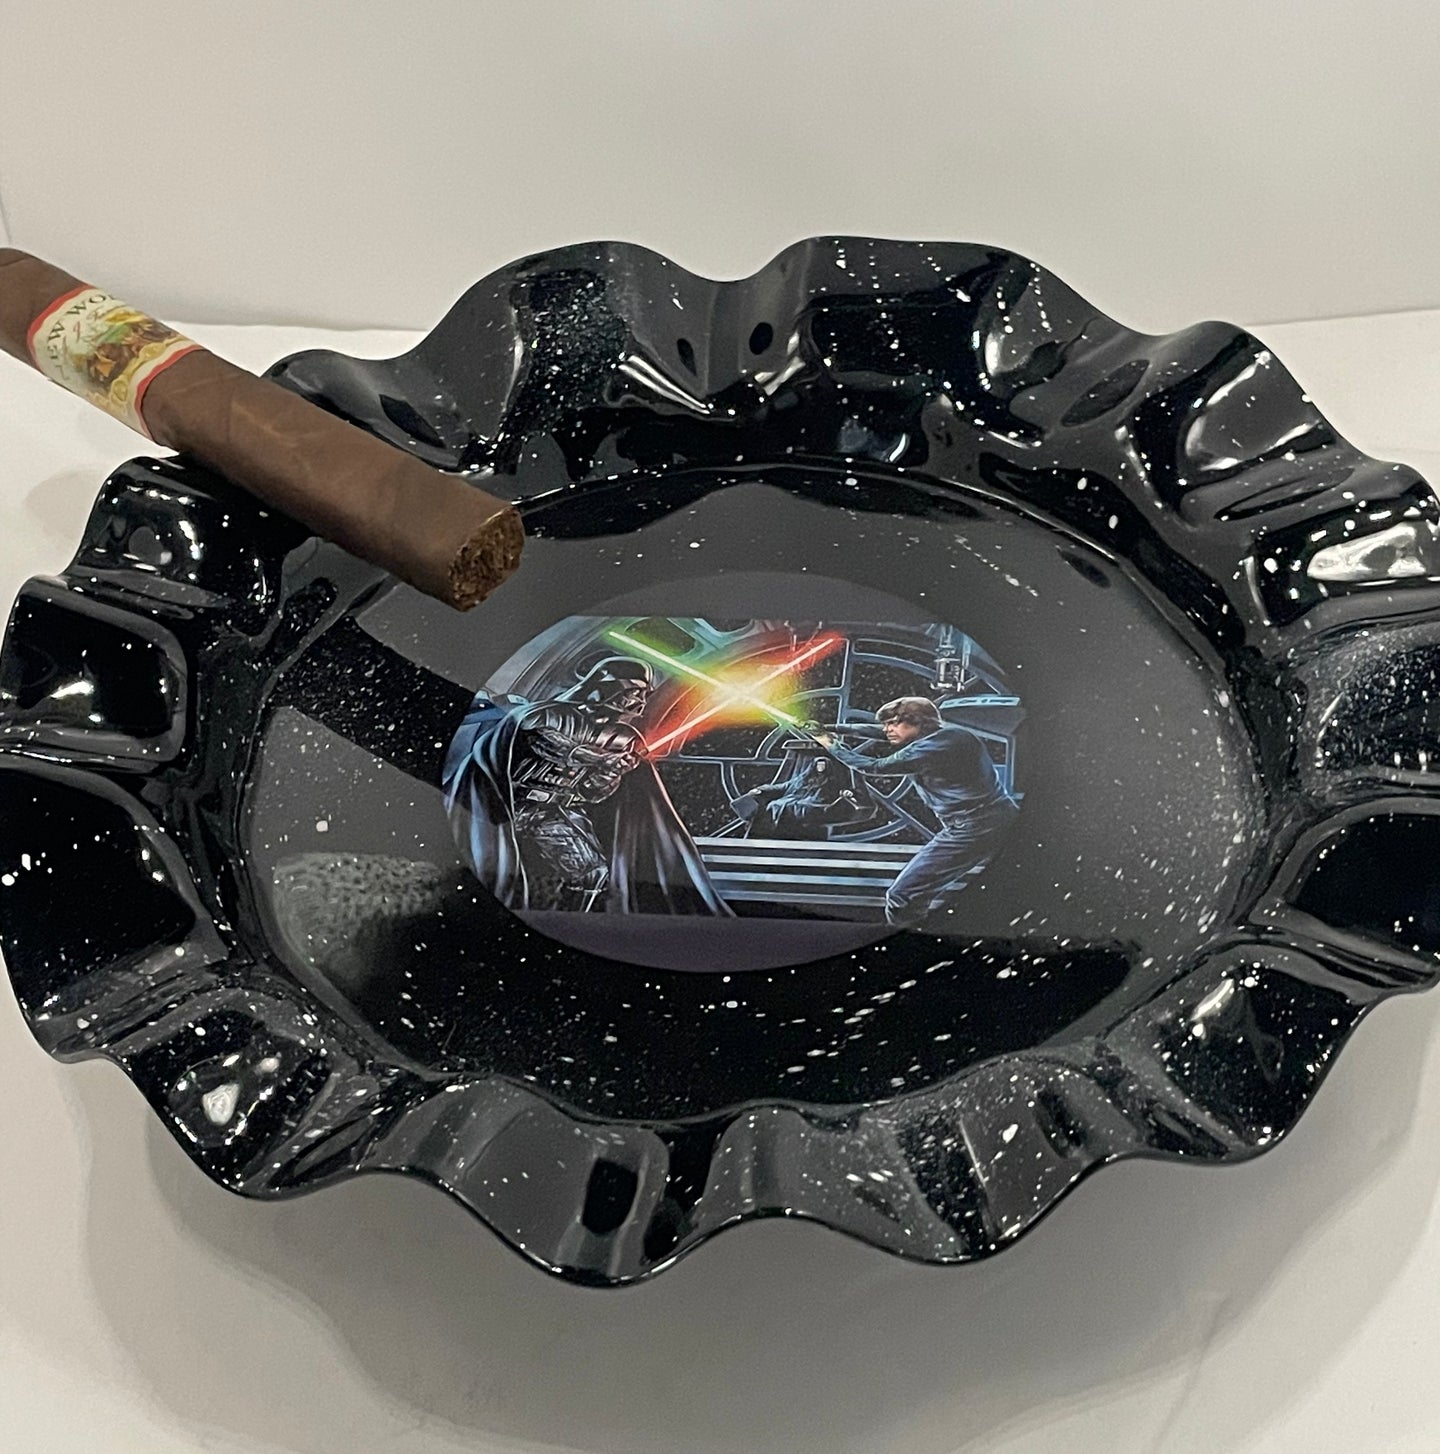 Star Wars Ashtray | Rolling Tray | Handmade Home Decor | Candy Tray | Custom Painted and Repurposed Vinyl Record | Luke Skywalker